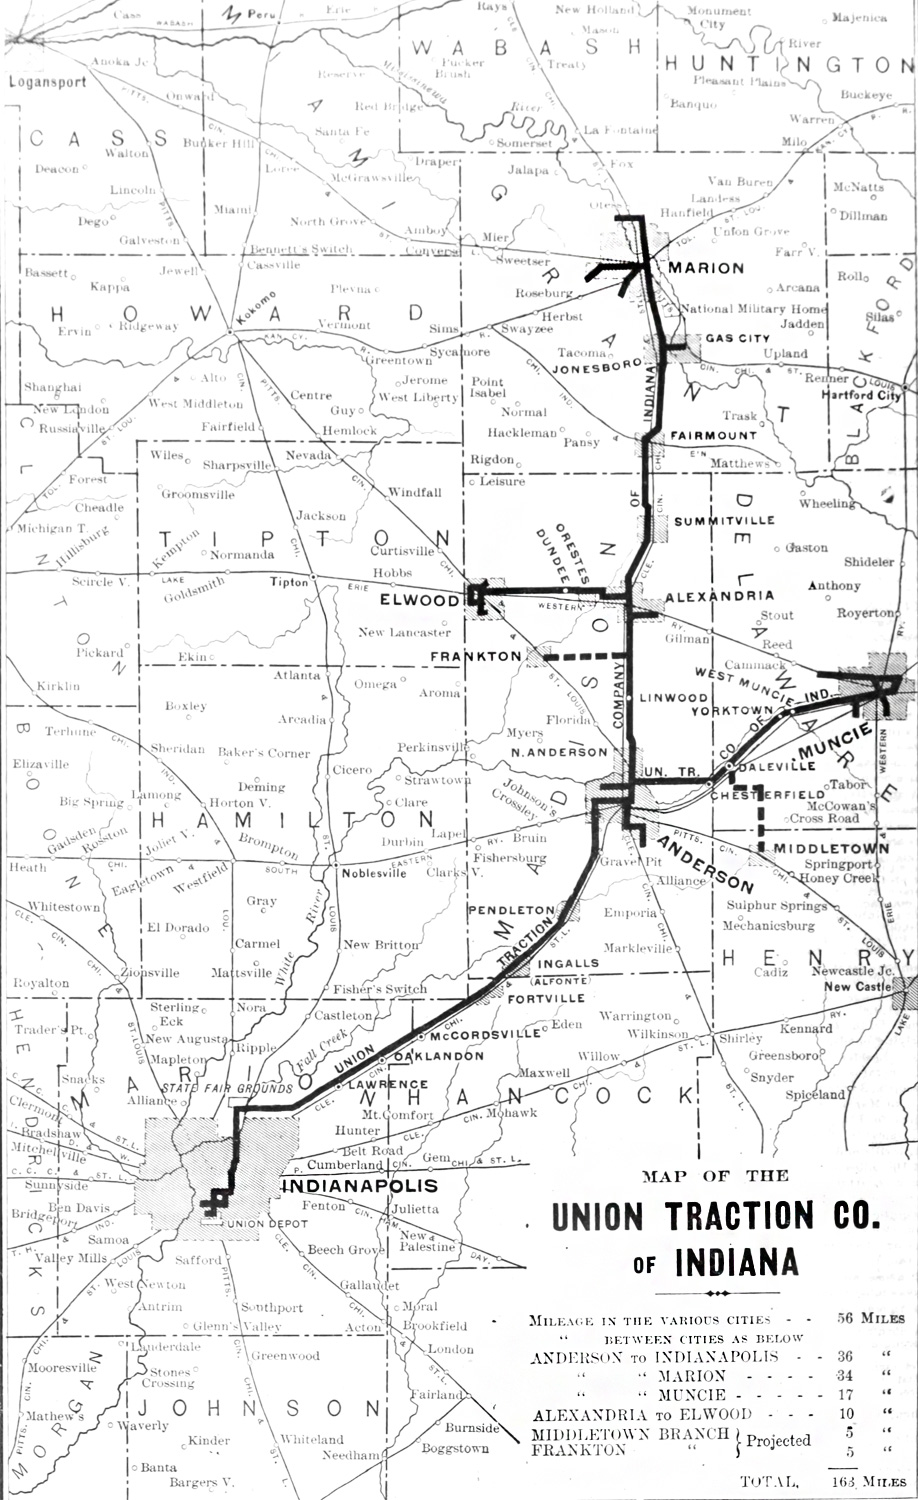 Union Traction of Indiana — Maps and Plans